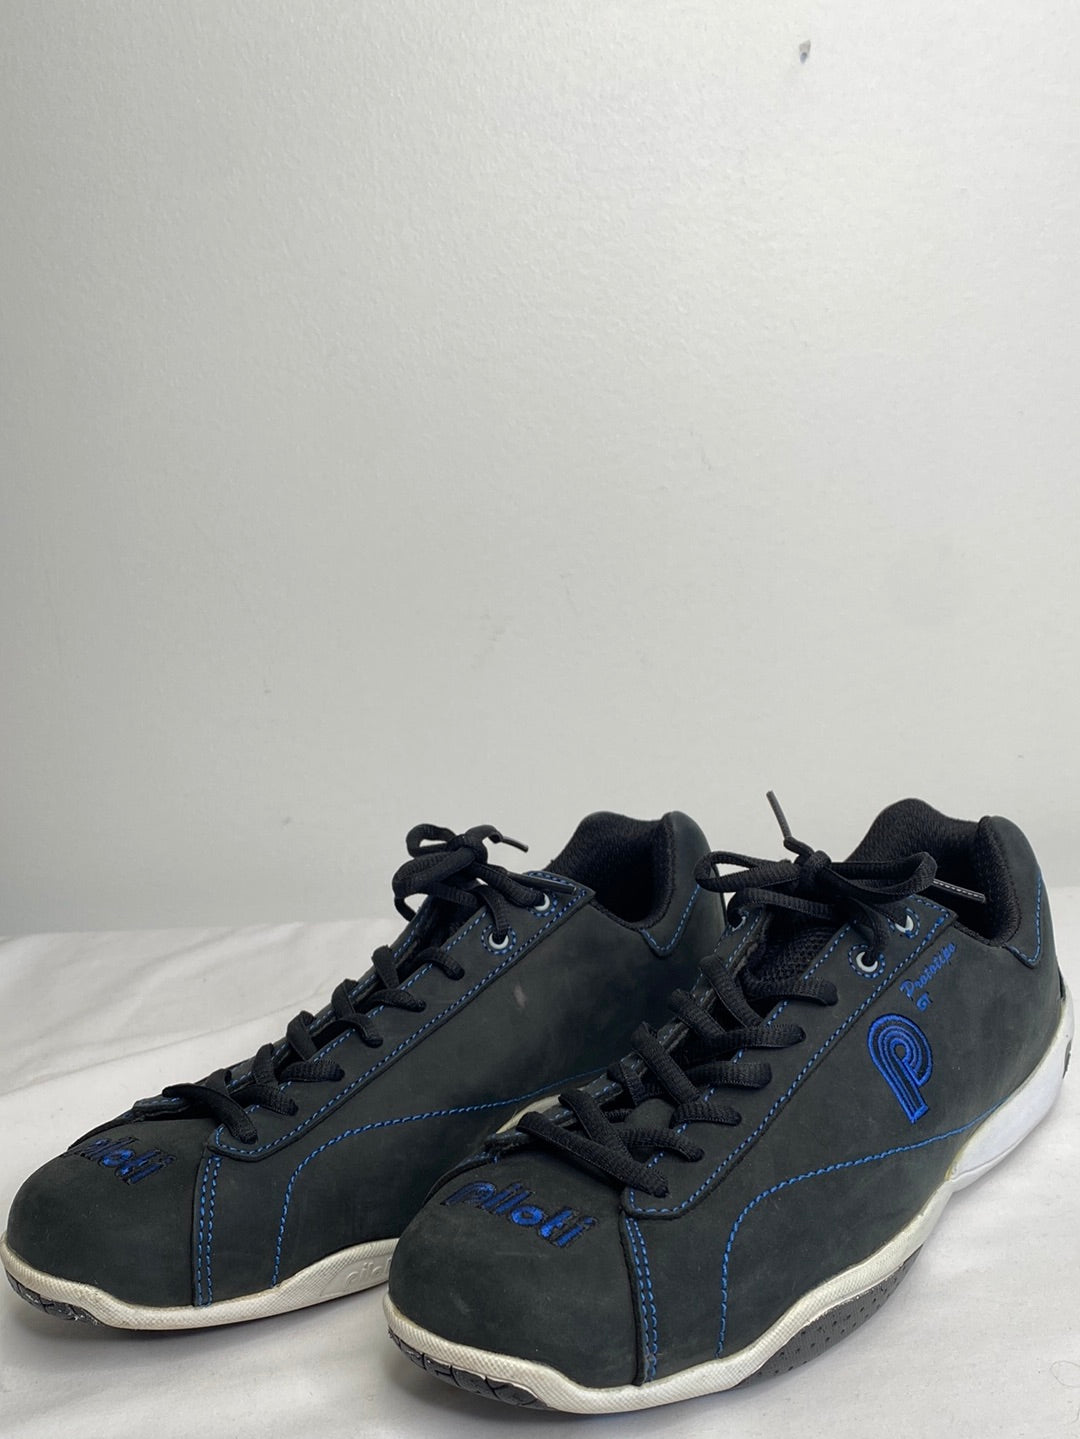 Piloti Prototipa Suede Leather Driving Racing Shoes (9.5)